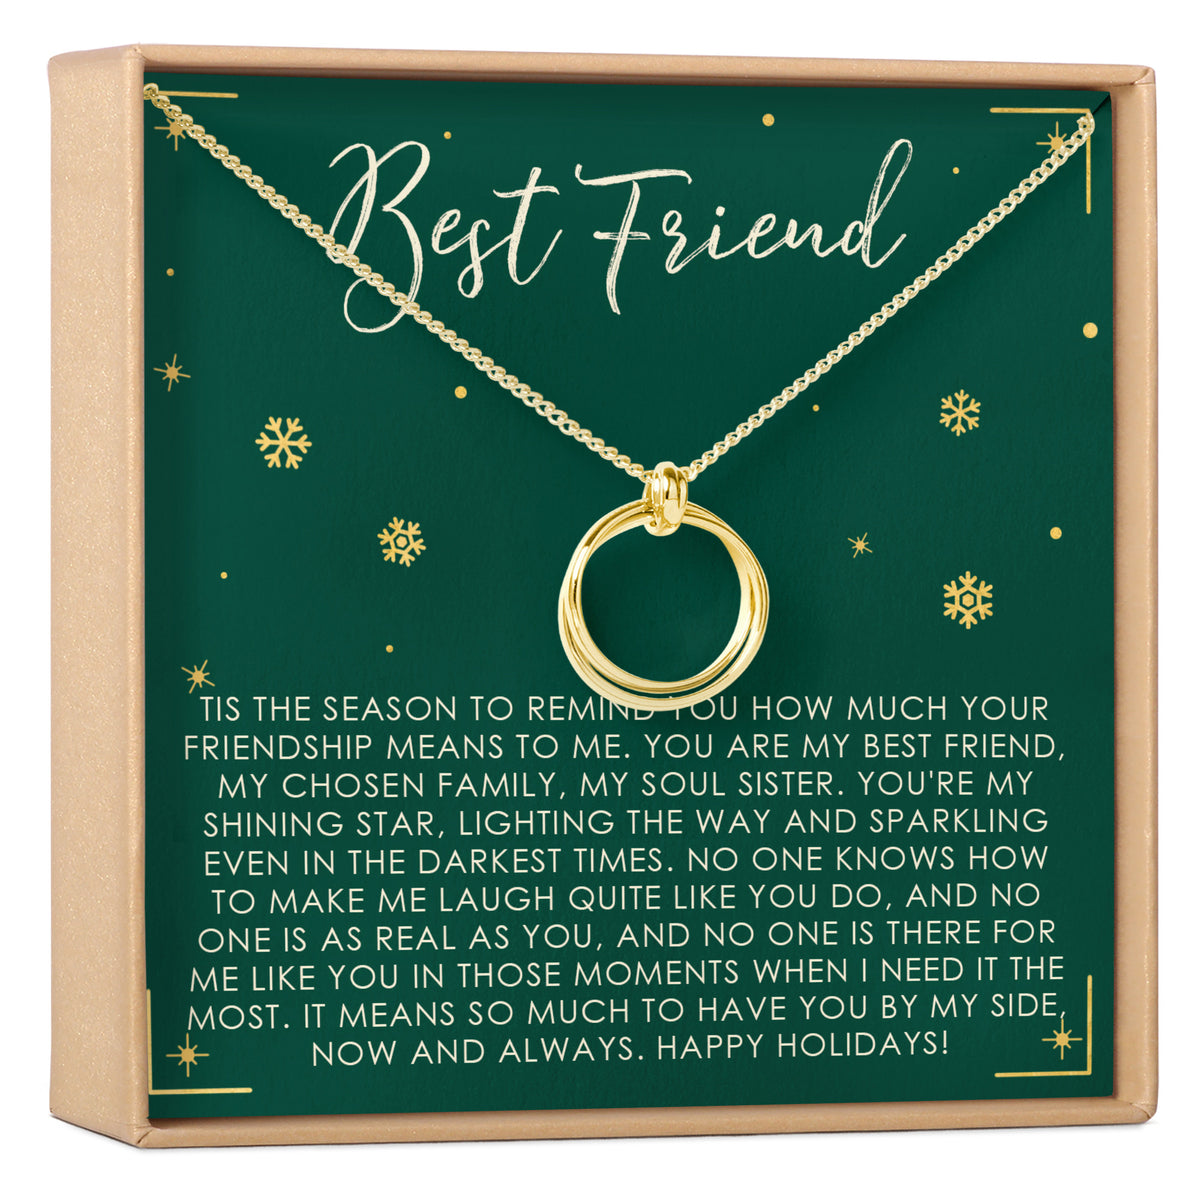 How sweet it is to be friends with you Christmas Gift Tag Friend Sweet –  Rainy Lain Designs LLC